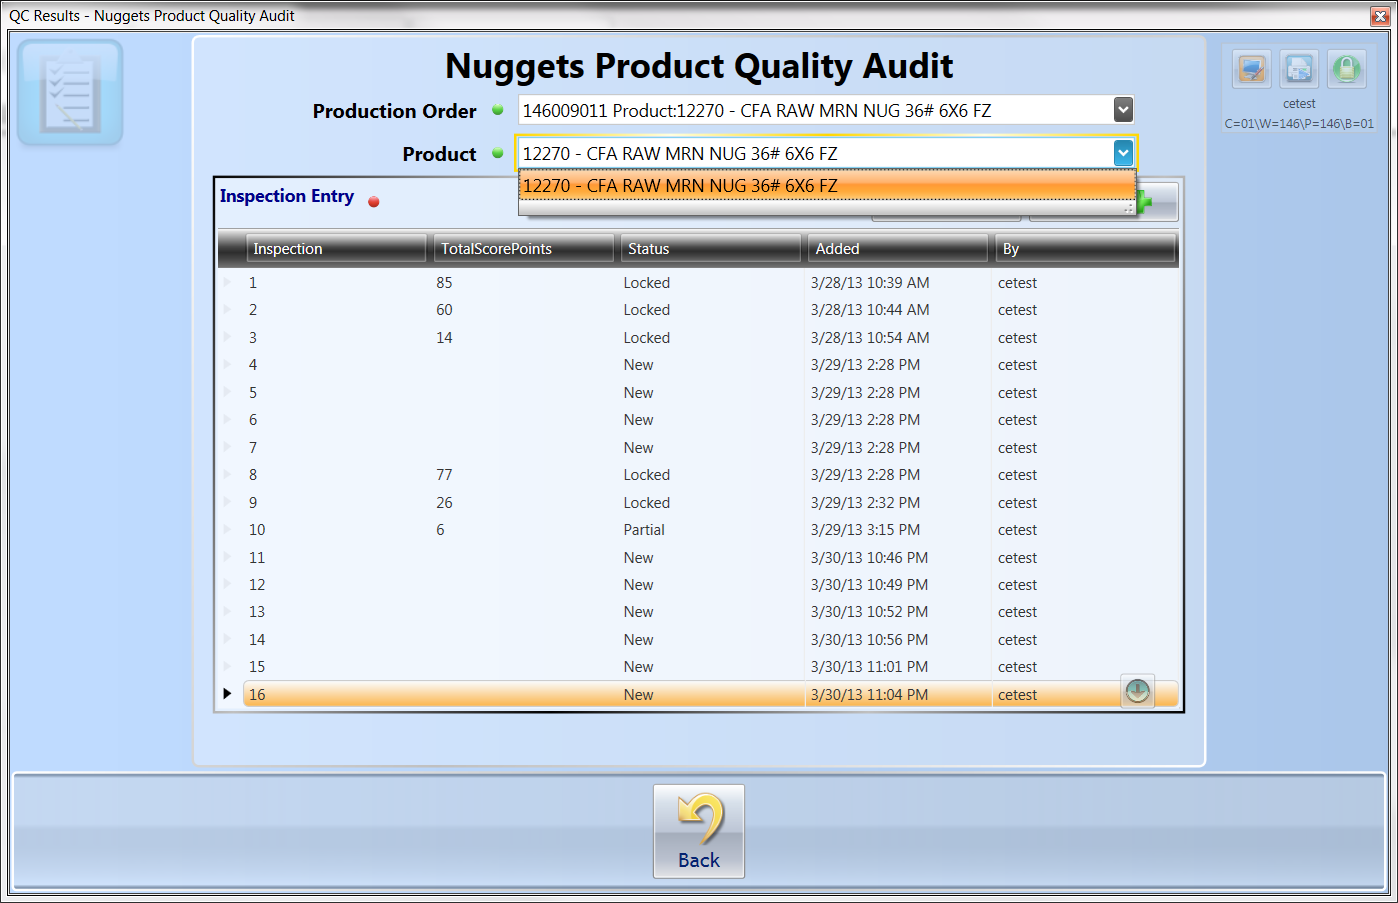 ProductQualityAudit header product 1.png